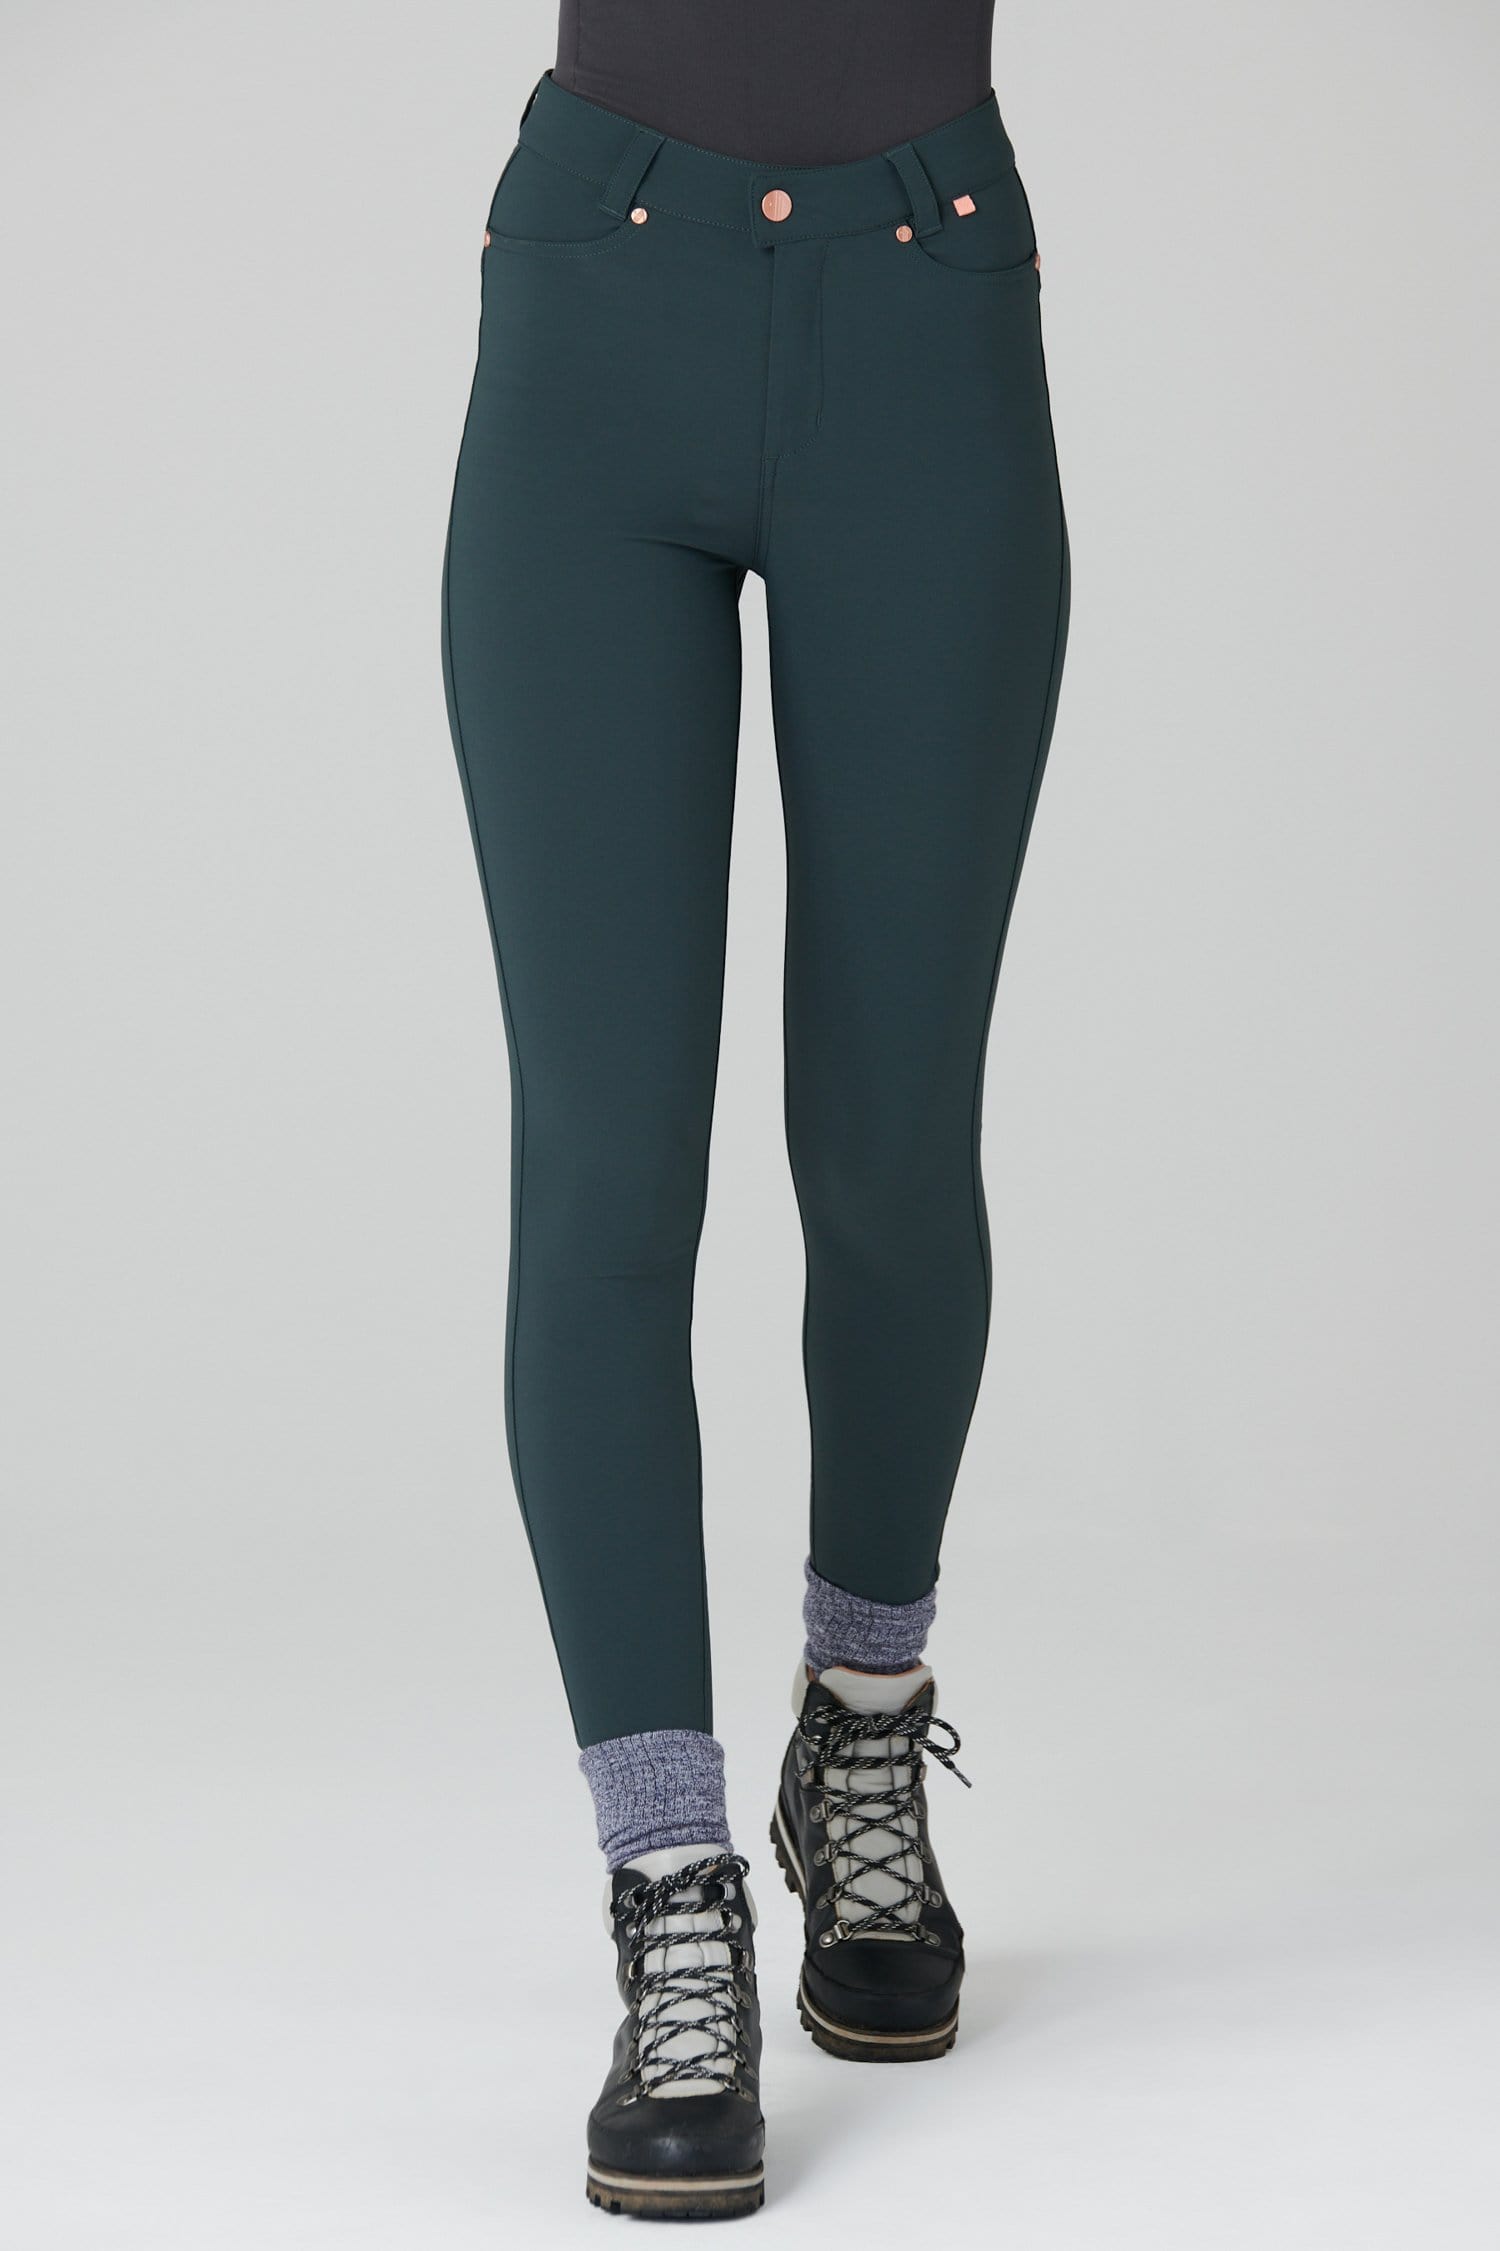 Max Stretch Skinny Outdoor Trousers - Forest Green - 32r / Uk14 - Womens - Acai Outdoorwear